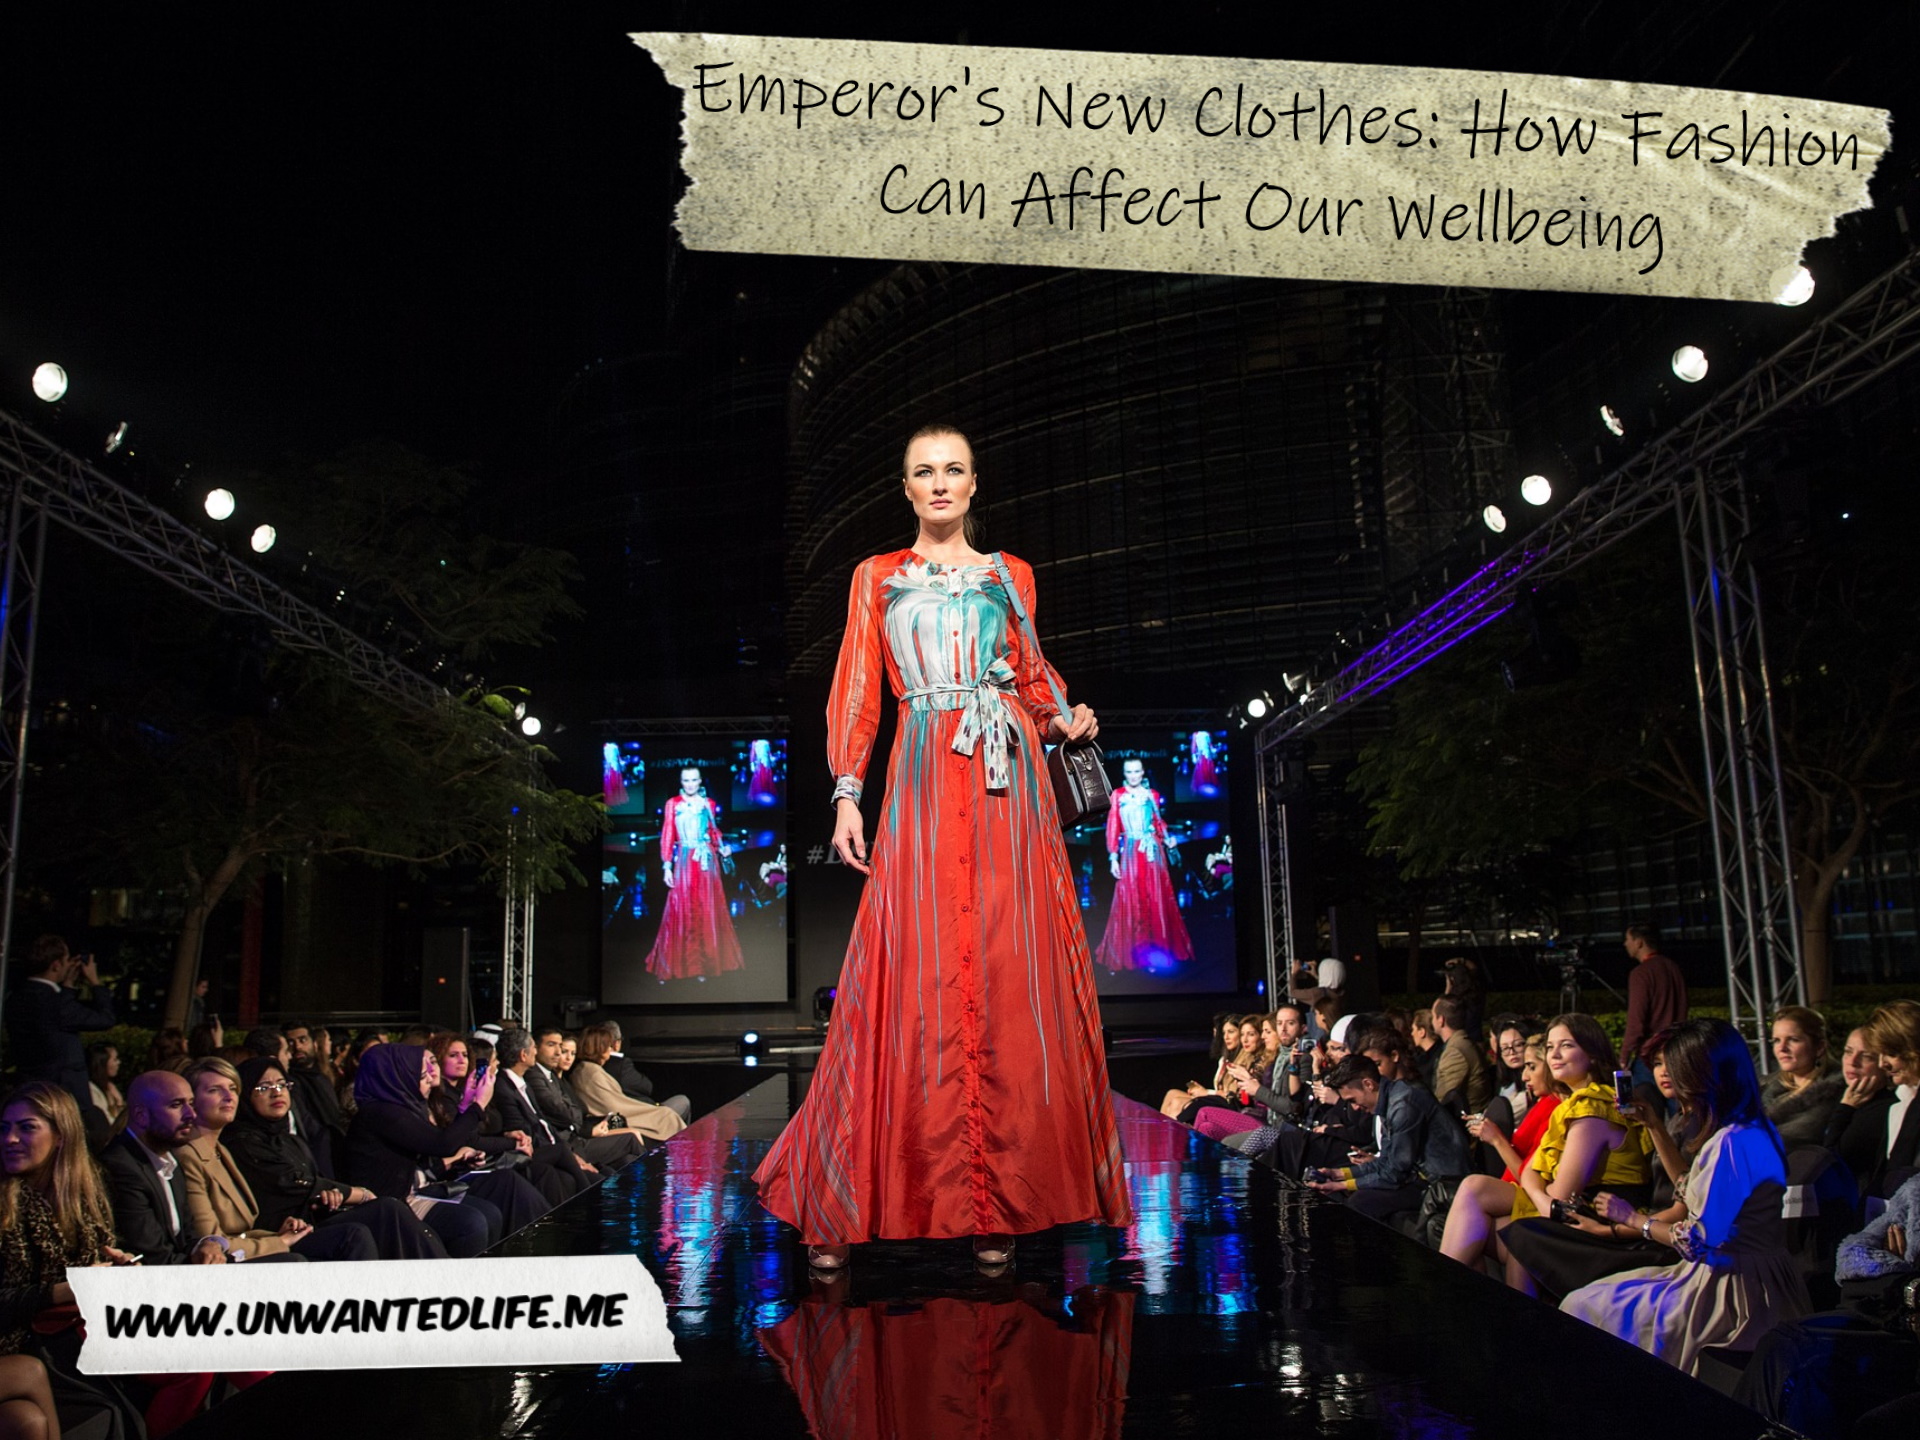 A photo of a model on a fashion runway to represent the topic of the article - Emperor's New Clothes: How Fashion Can Affect Our Wellbeing